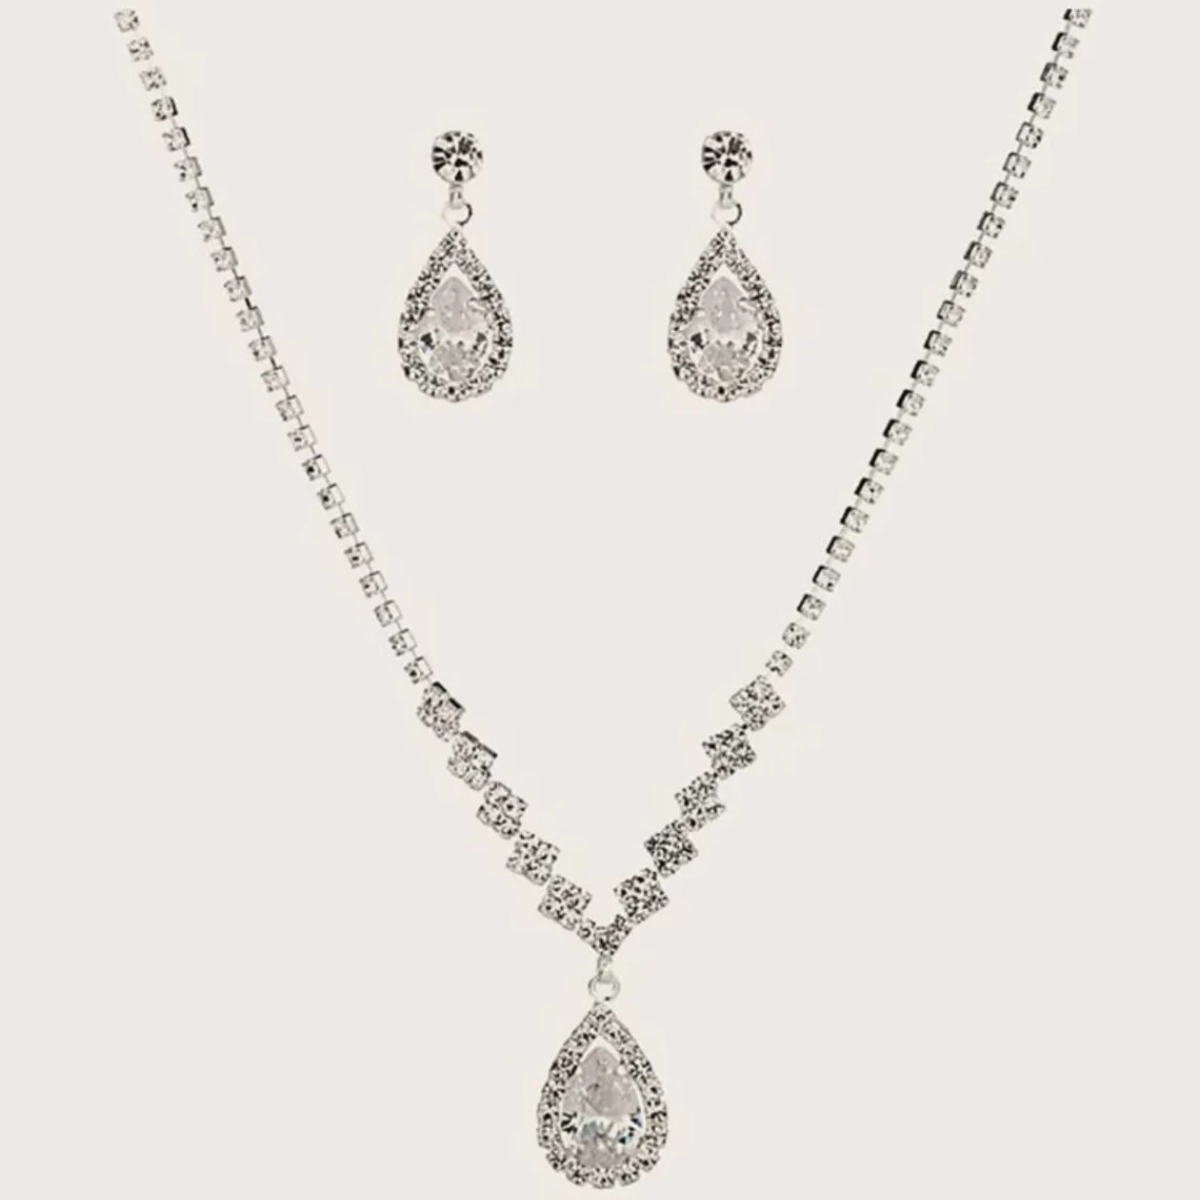 36. Shine Bright on Your 7th Anniversary with a Stunning Silver Jewelry Set